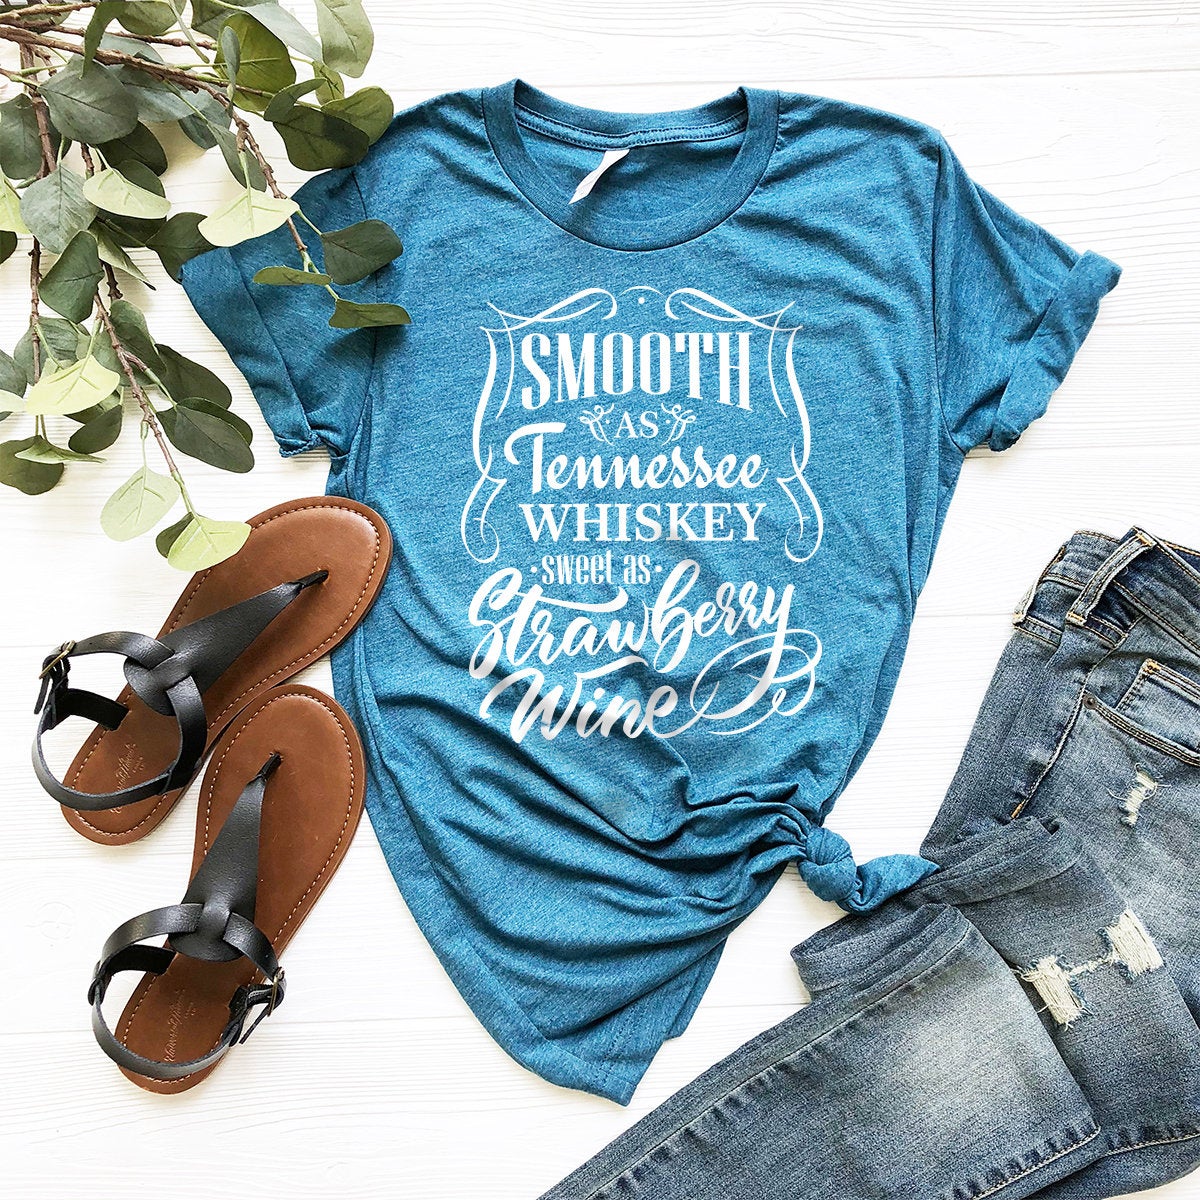 Smooth As Tennessee Whiskey Sweet As Strawberry Wine T-Shirt, Tennessee Whiskey Song Quote Shirt, Country Music Shirt, Chris Stapleton Shirt - Fastdeliverytees.com